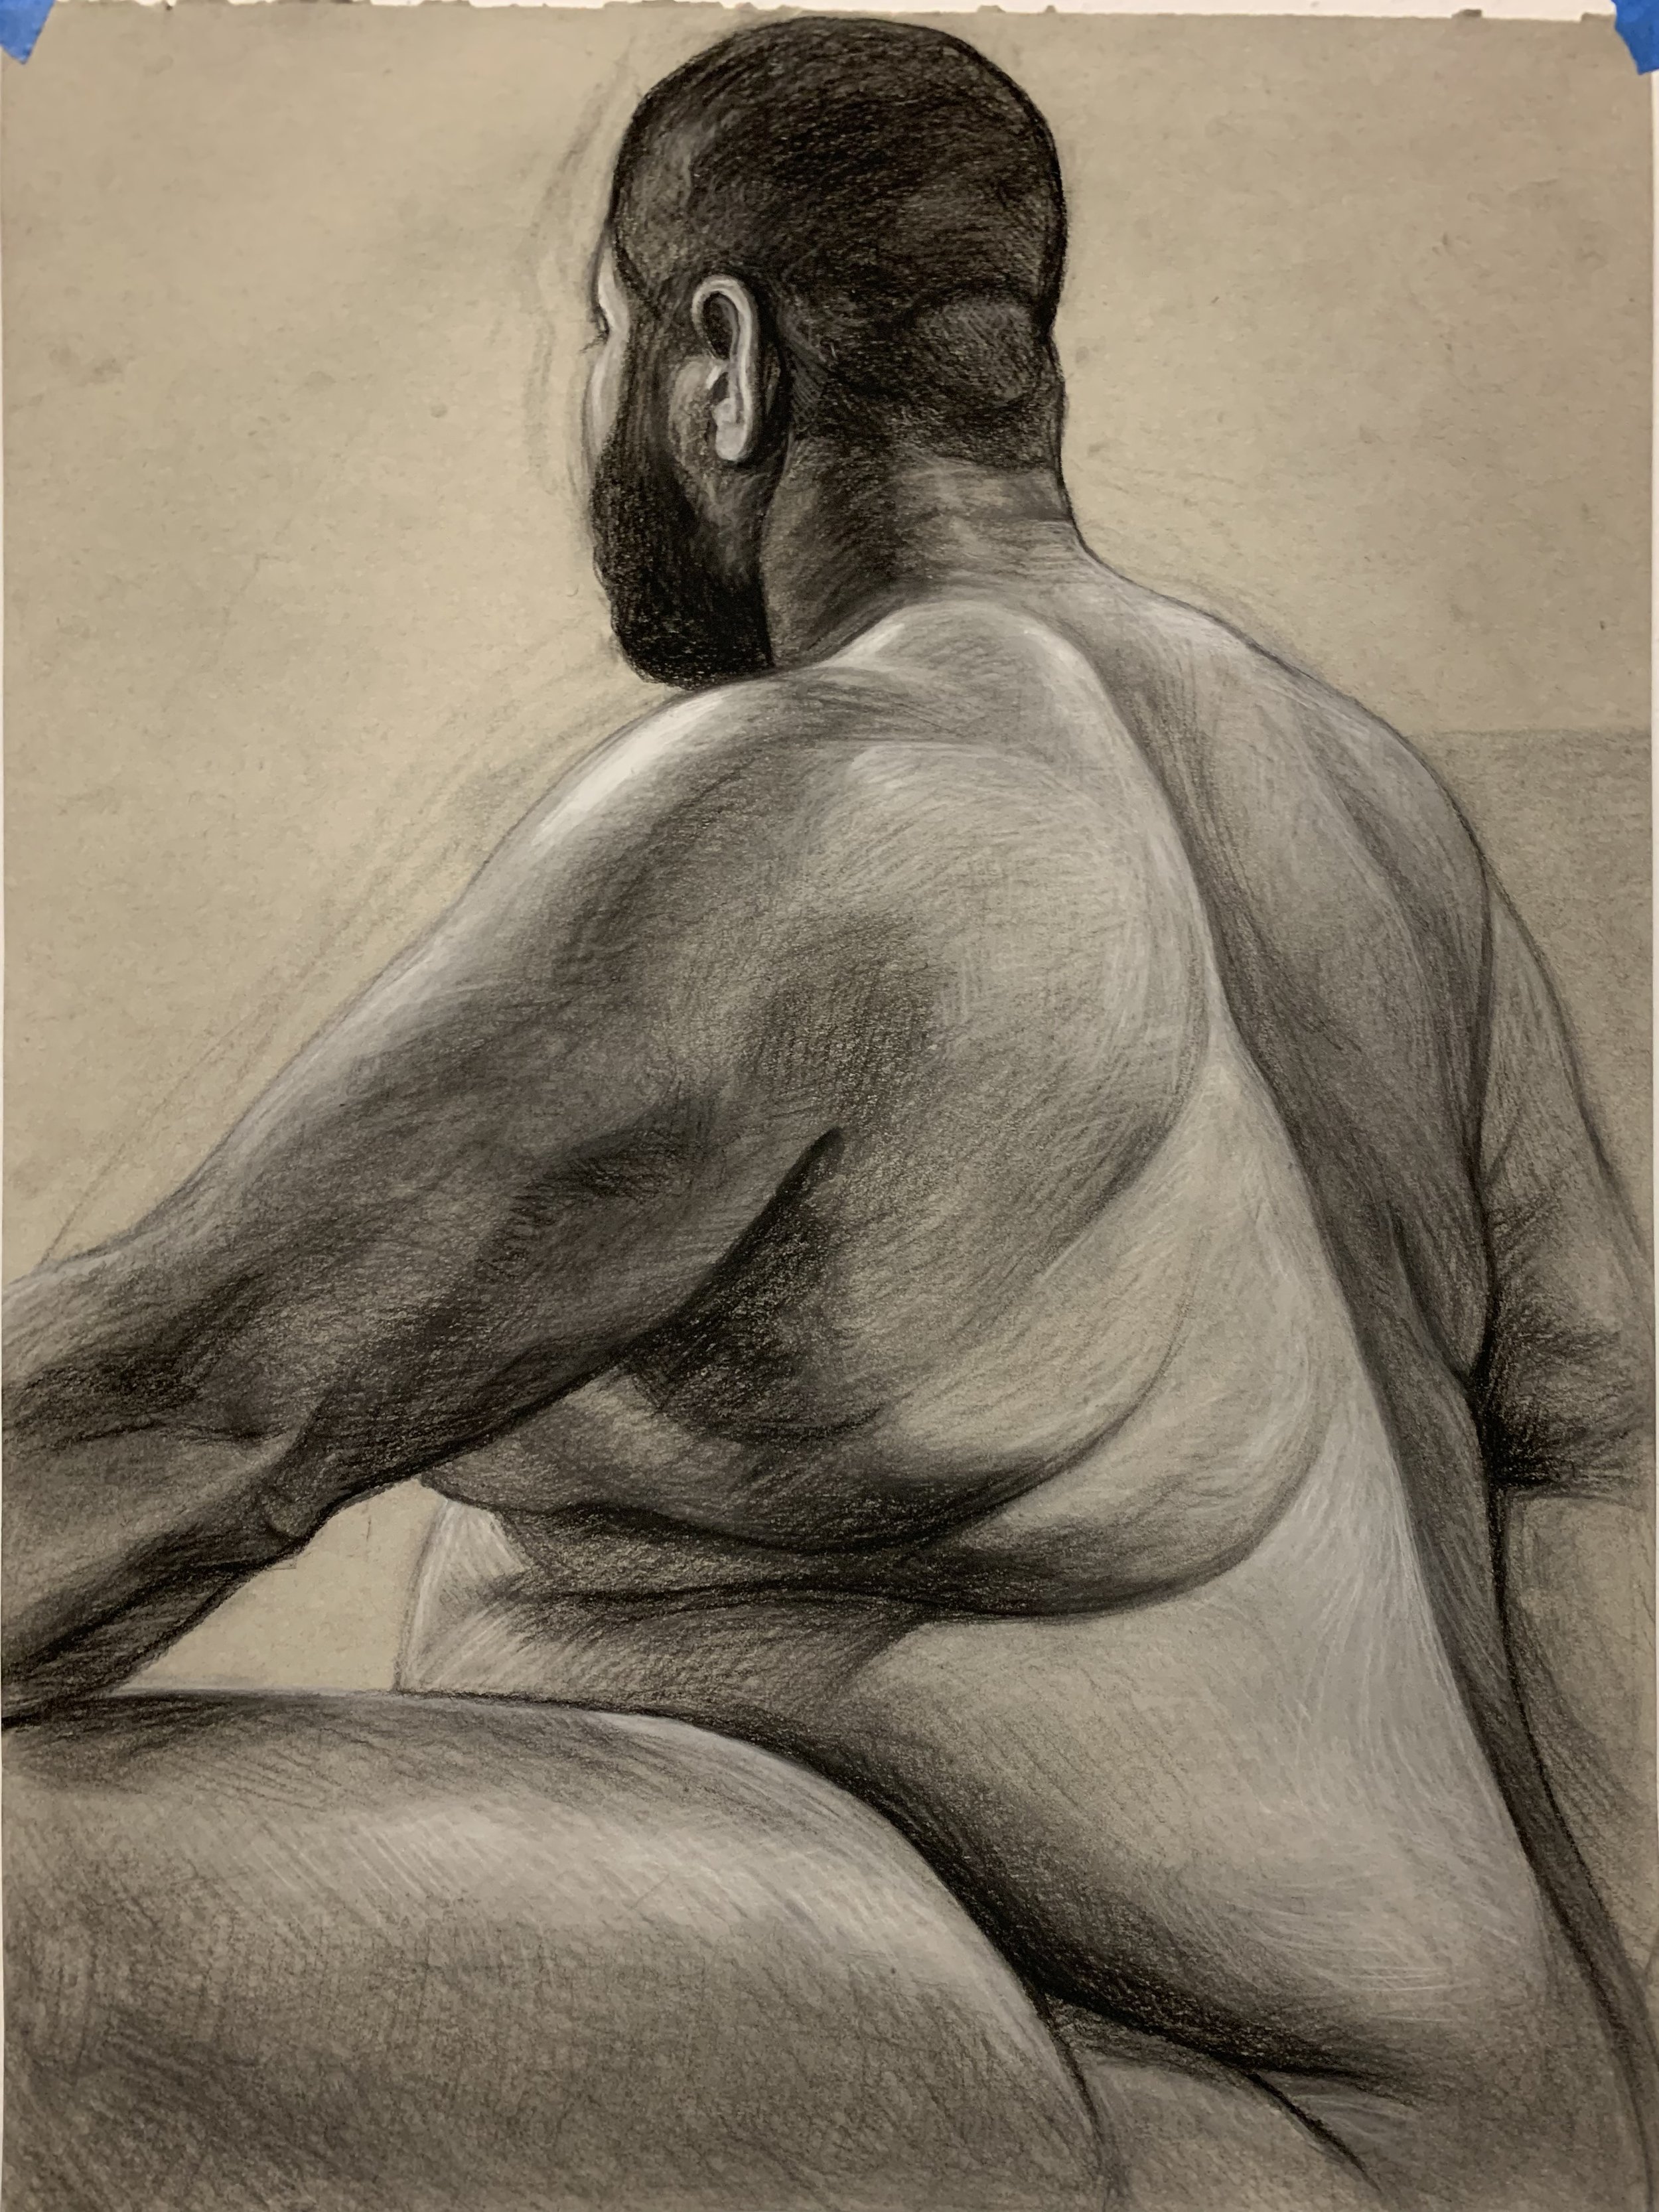  3 session figure drawing from life, charcoal on toned paper, 18x24, 2021. 